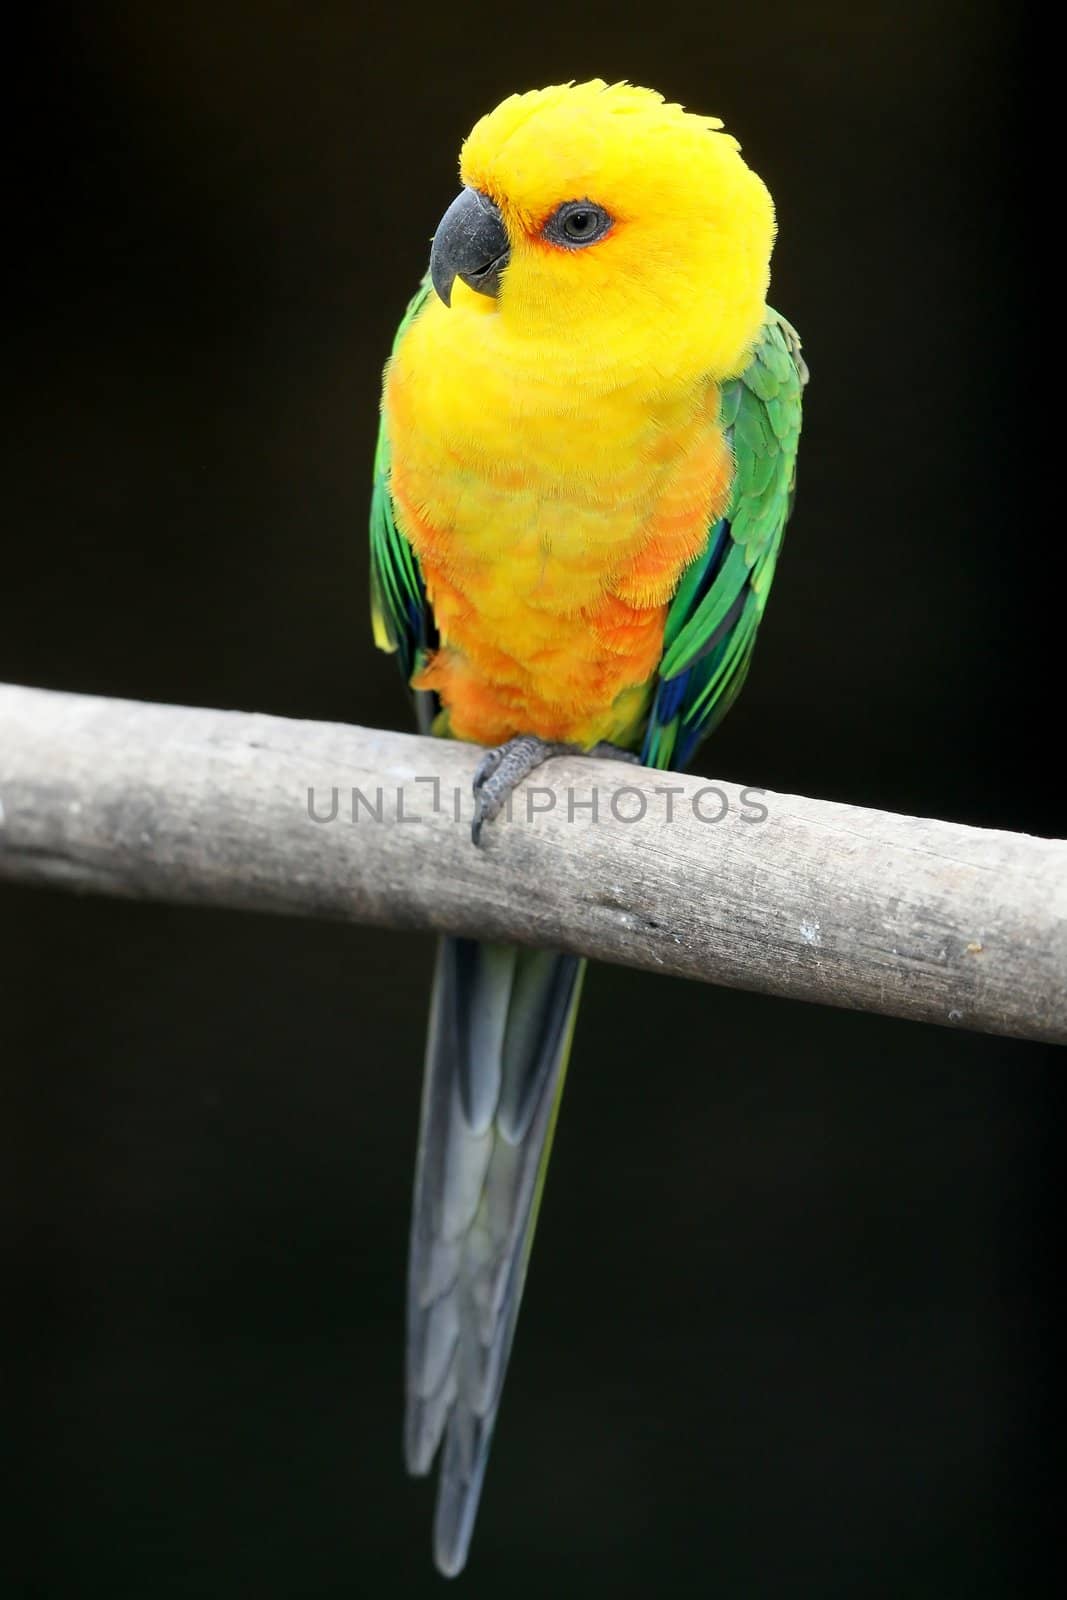 Small parrot with beautiful orange, yellow and green feathers